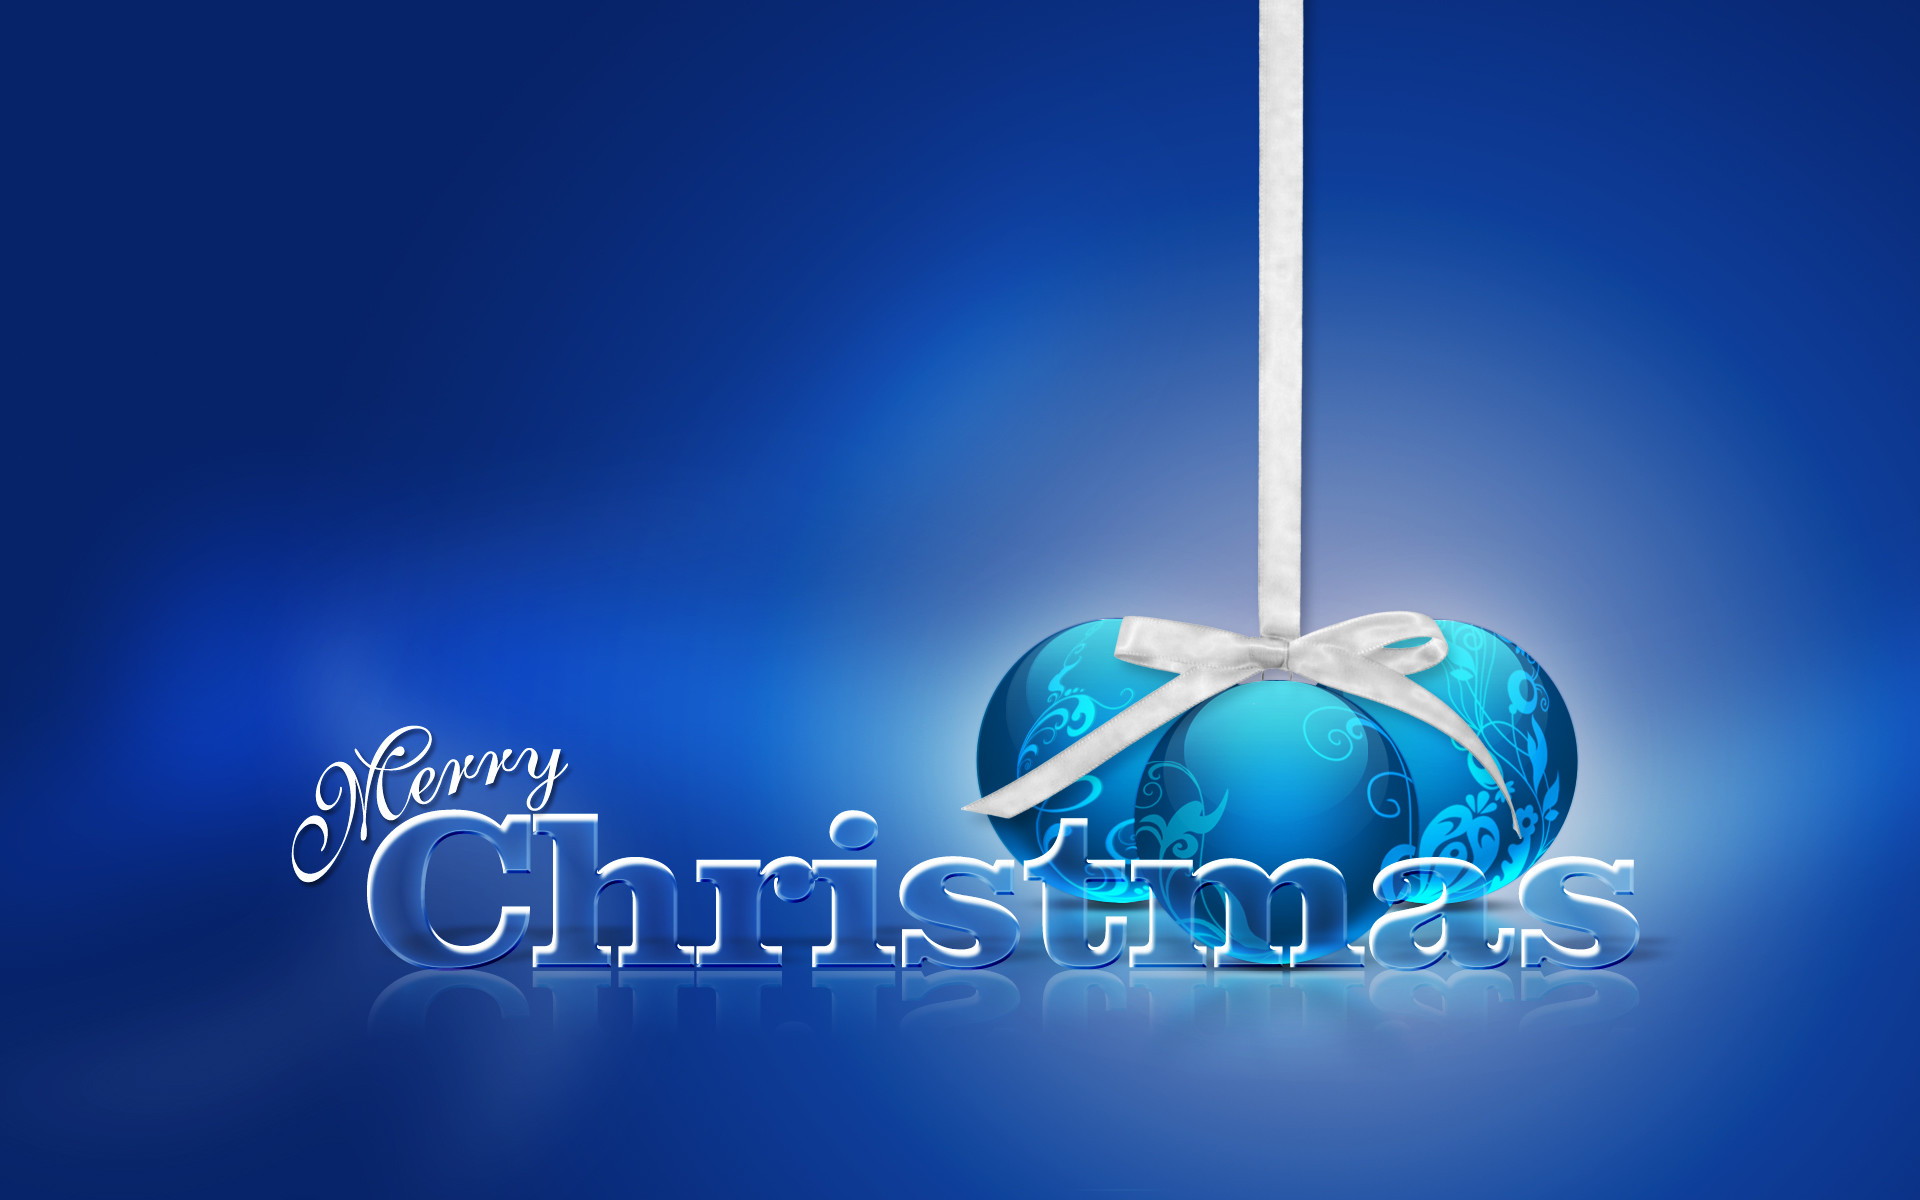 1920x1200 Digital Merry Christmas Wallpapers Pictures.